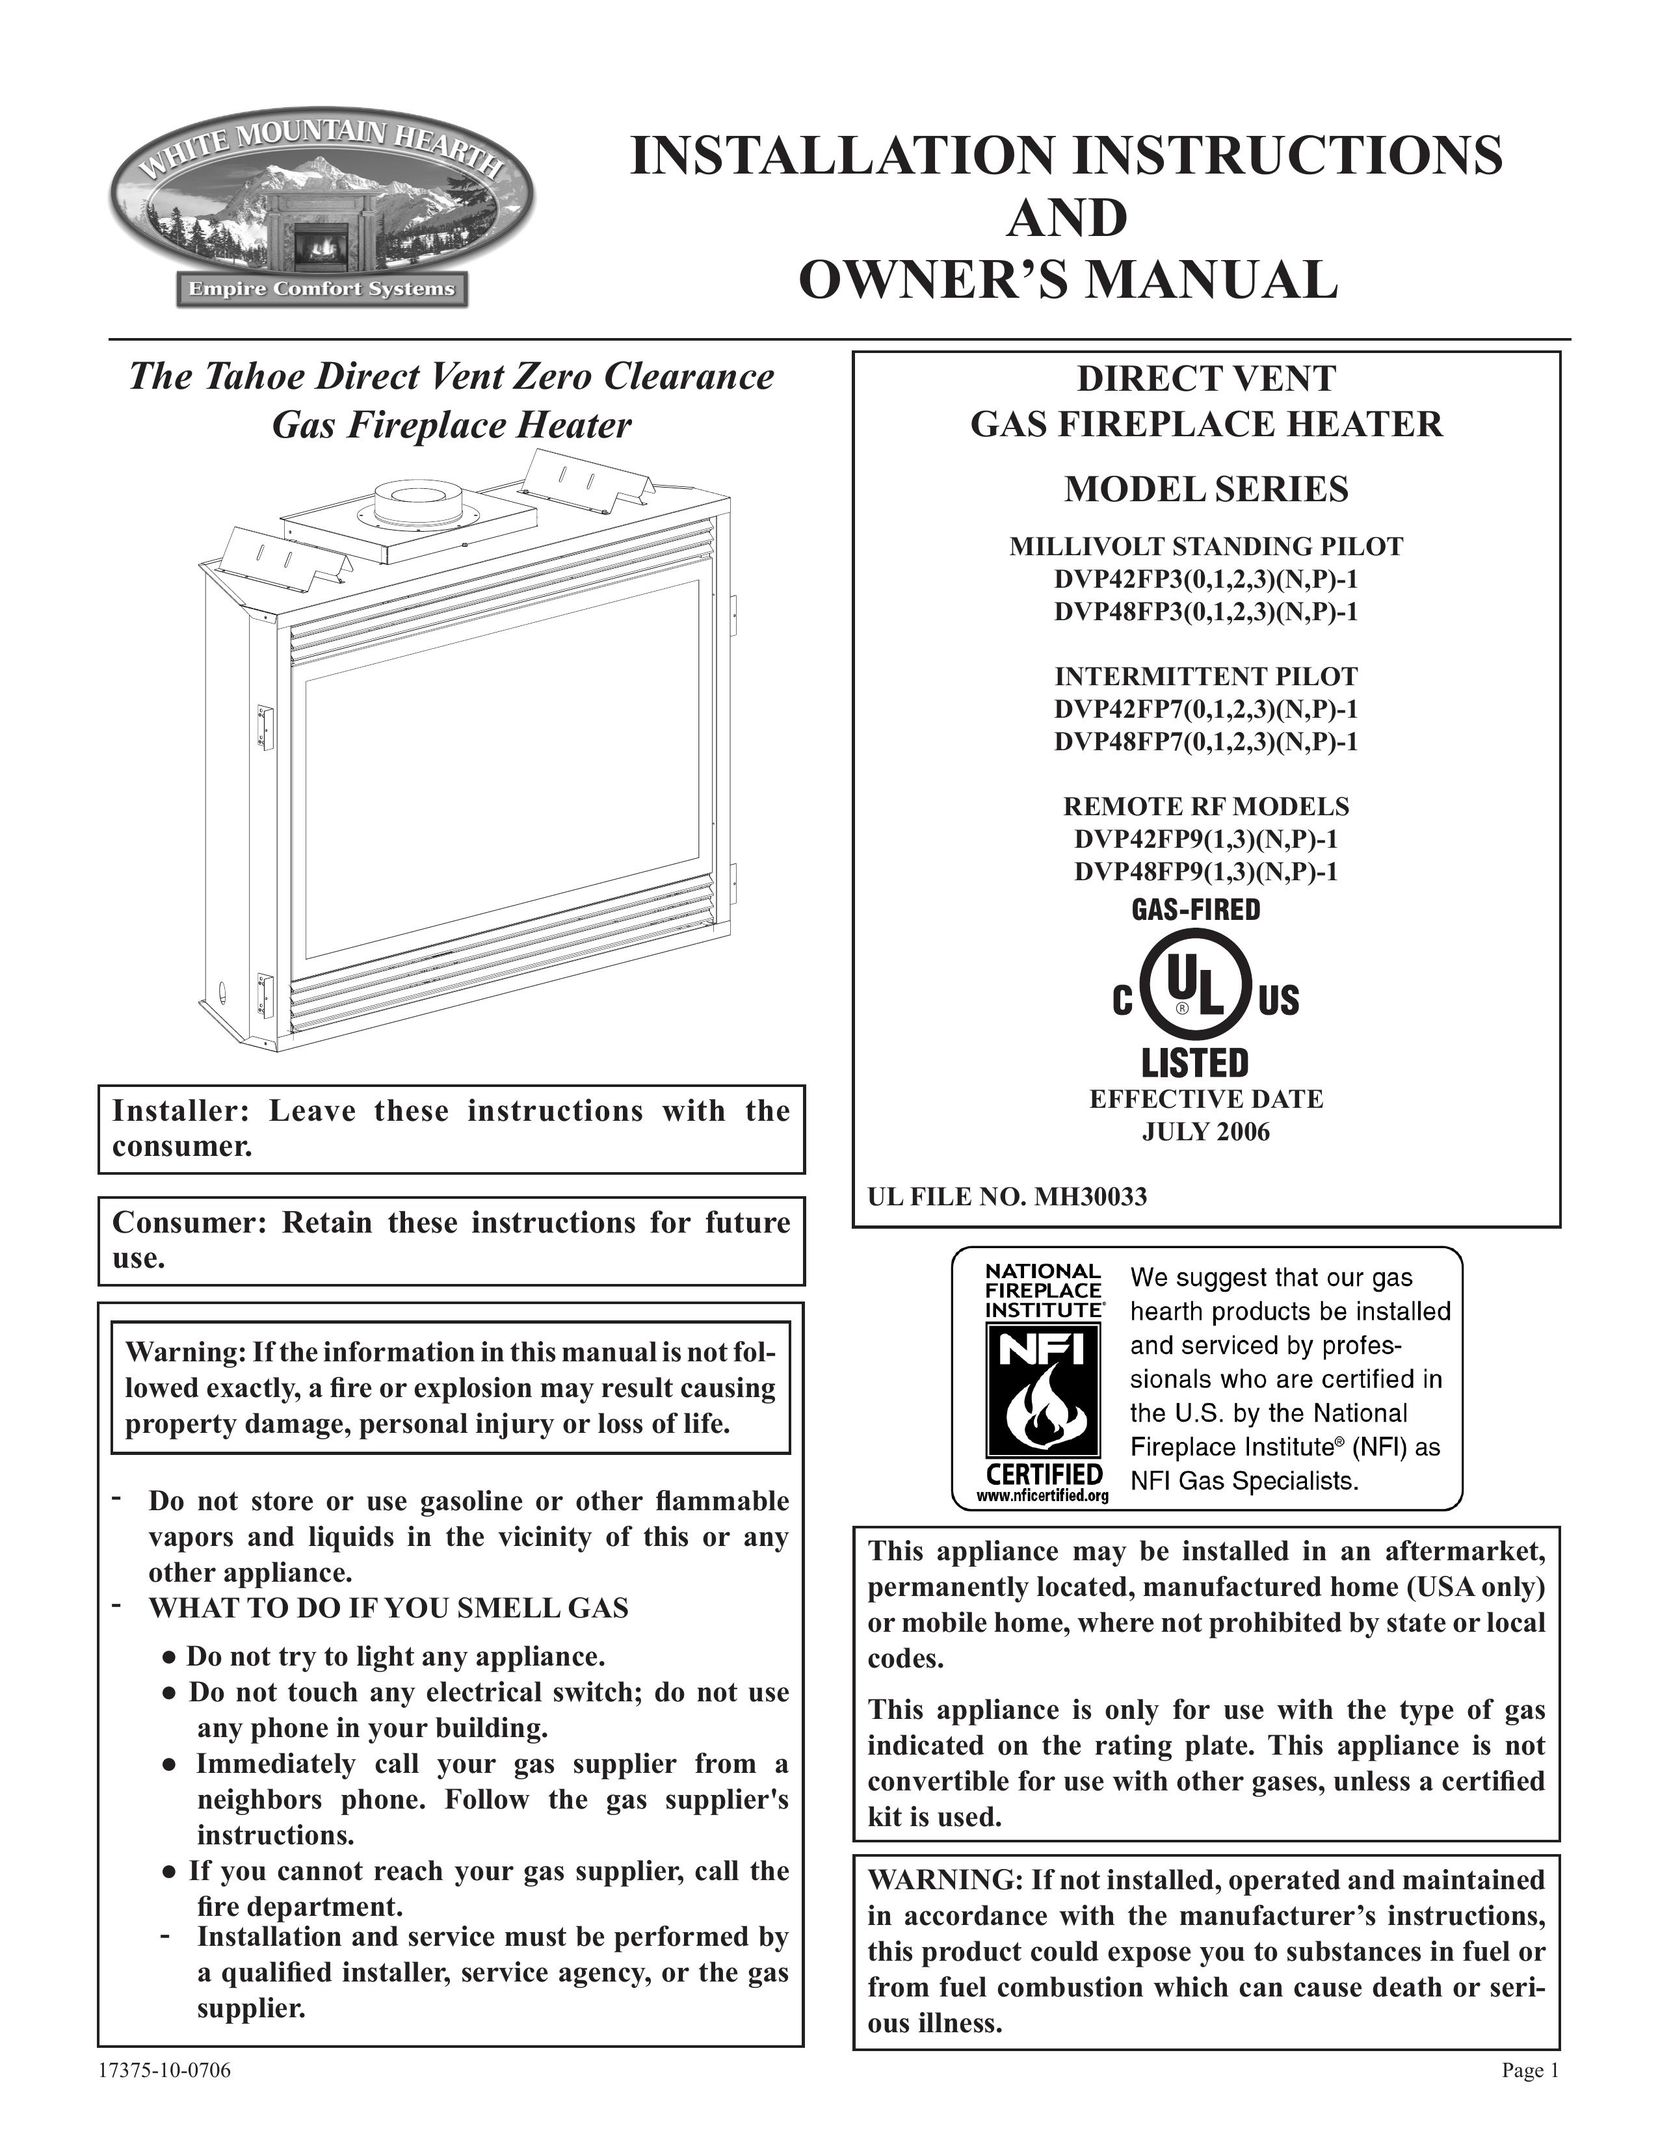 Empire Comfort Systems DVP42FP9(1,3)(N,P)-1 Indoor Fireplace User Manual